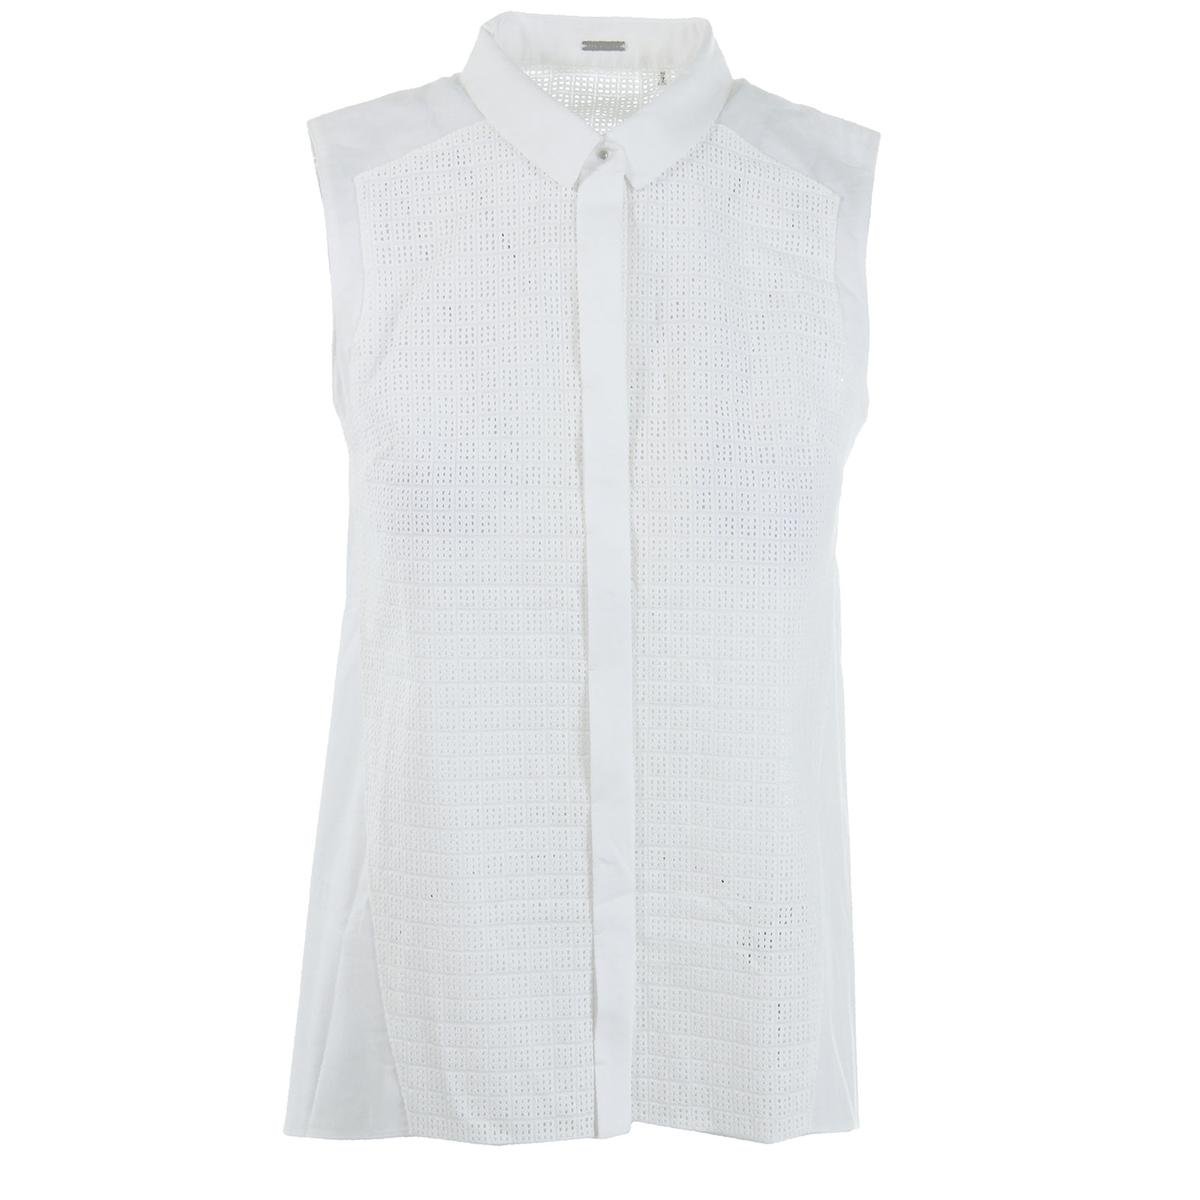 Elie Tahari 0672 Womens Reina White Perforated Button-Down Top Blouse L ...